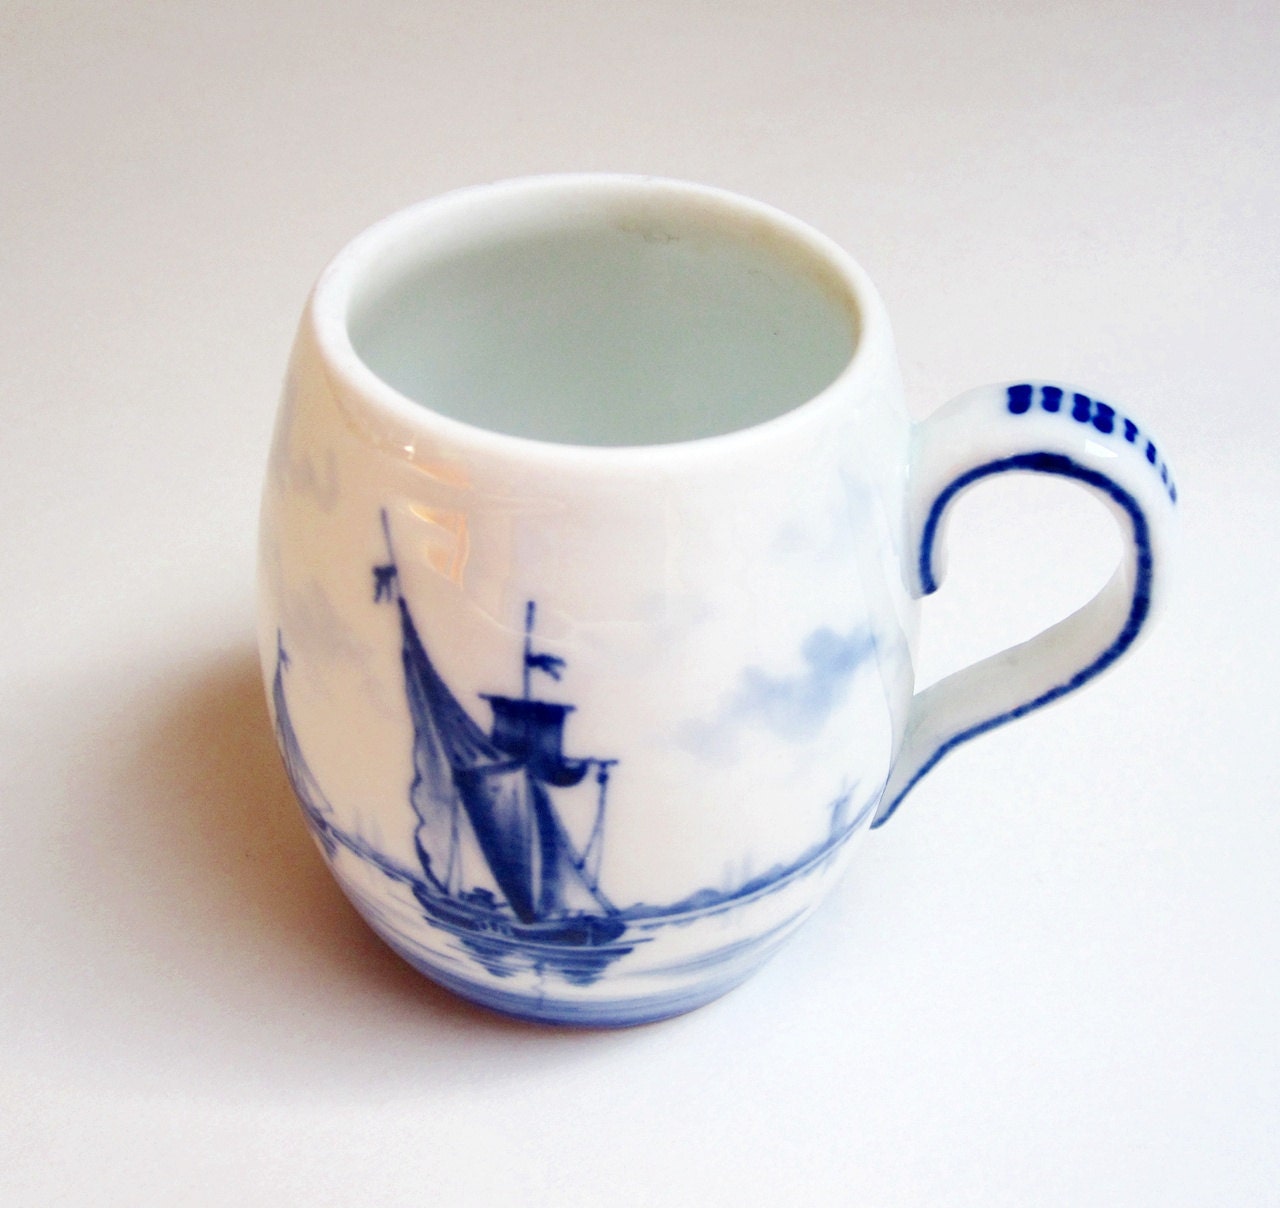 Blue and White Delft Style Cup from Germany- Vintage and Dainty